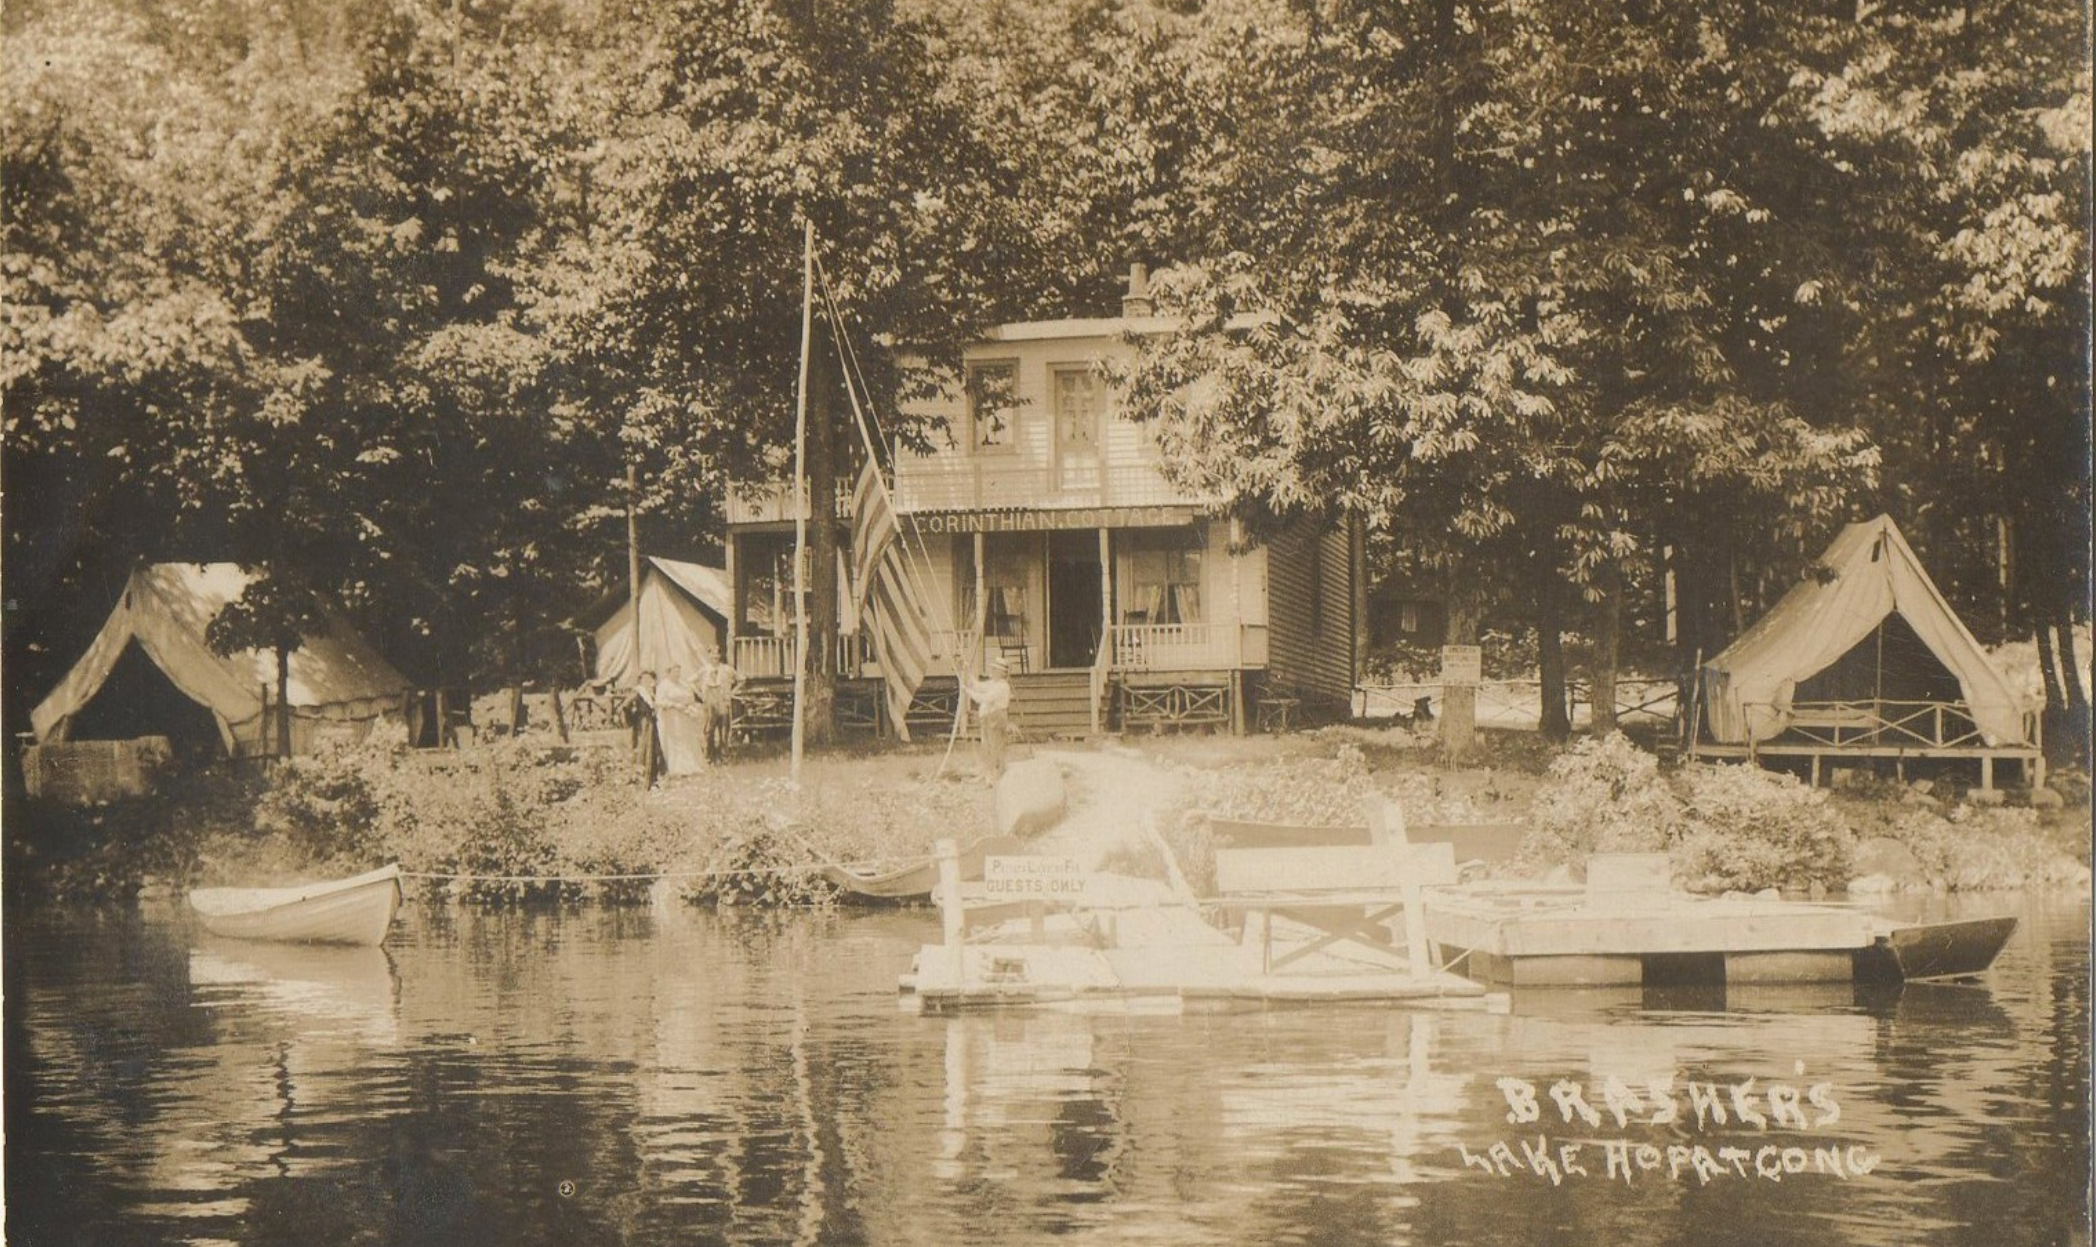 Lake Hopatcong - Brashers - Either a cottage or a guest house - c 1910 or so